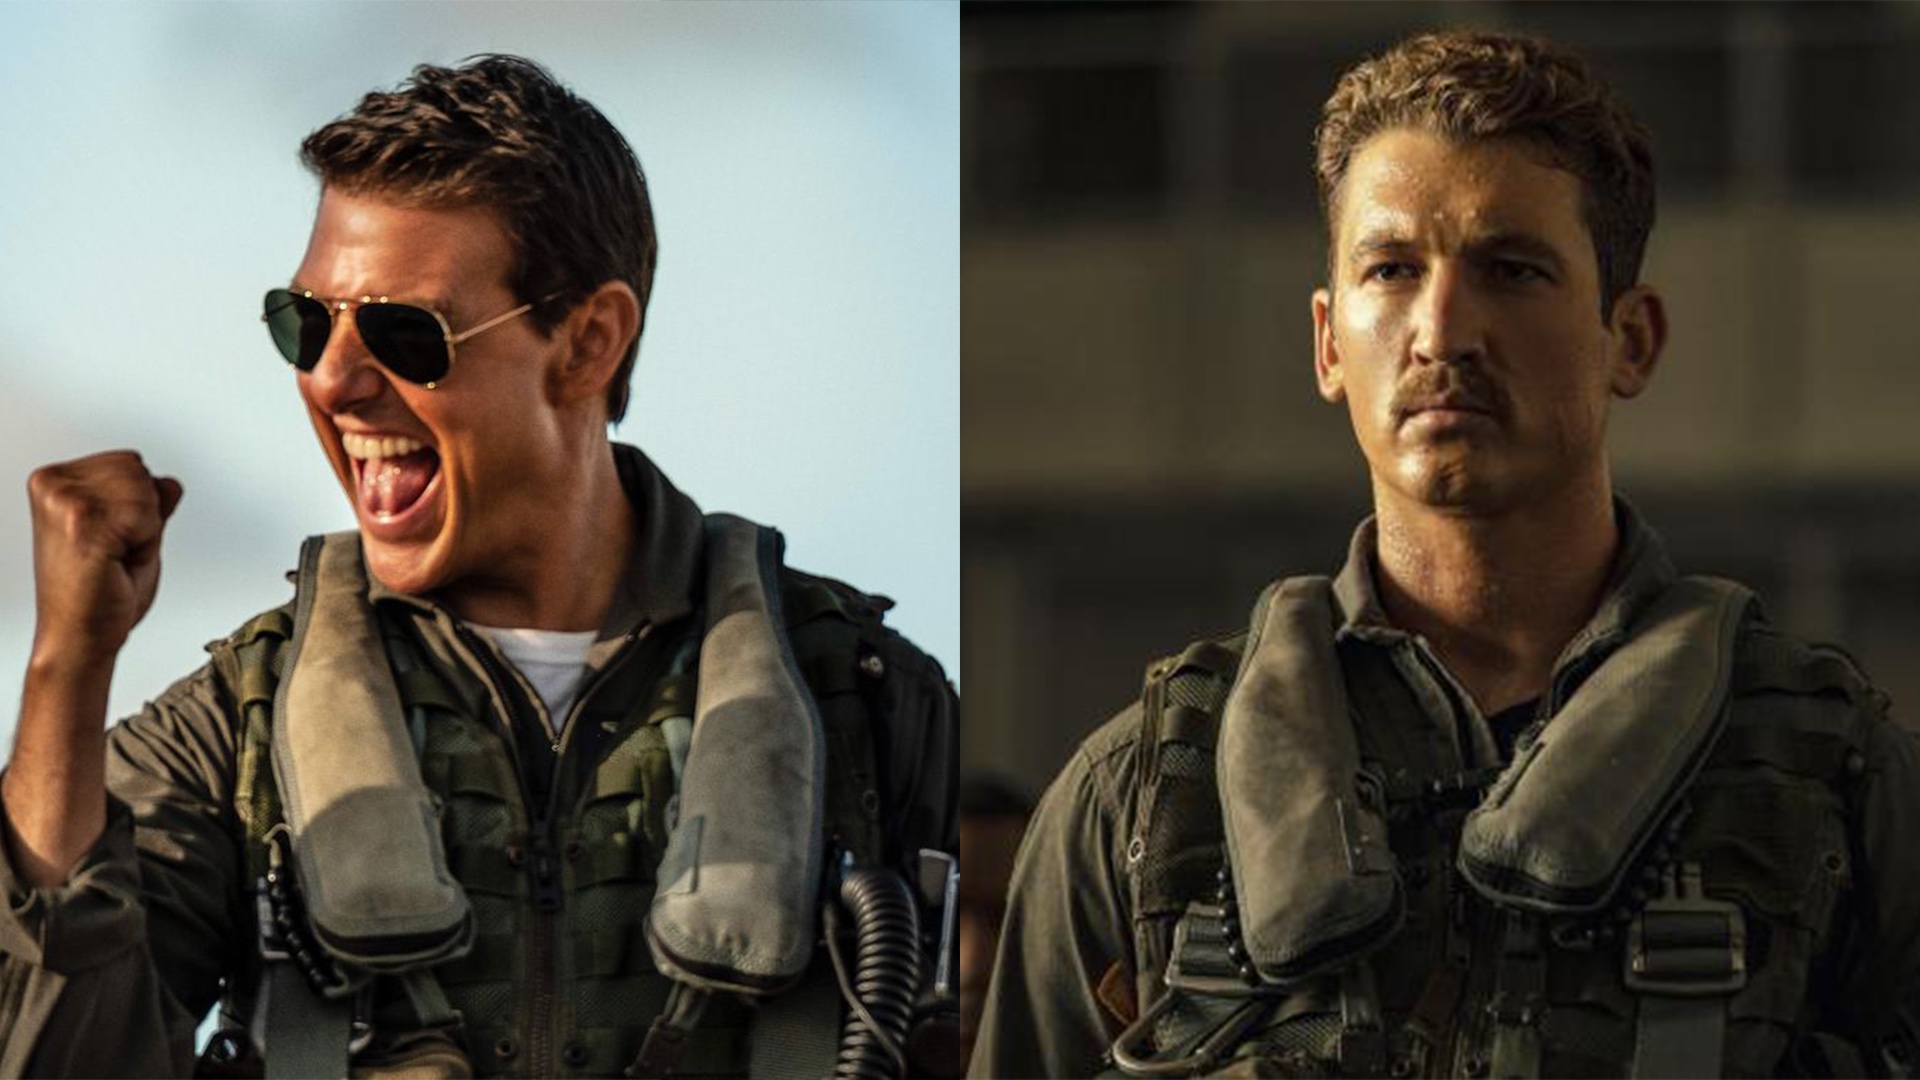 Need For More Speed: Miles Teller Reveals He's In Talks For Top